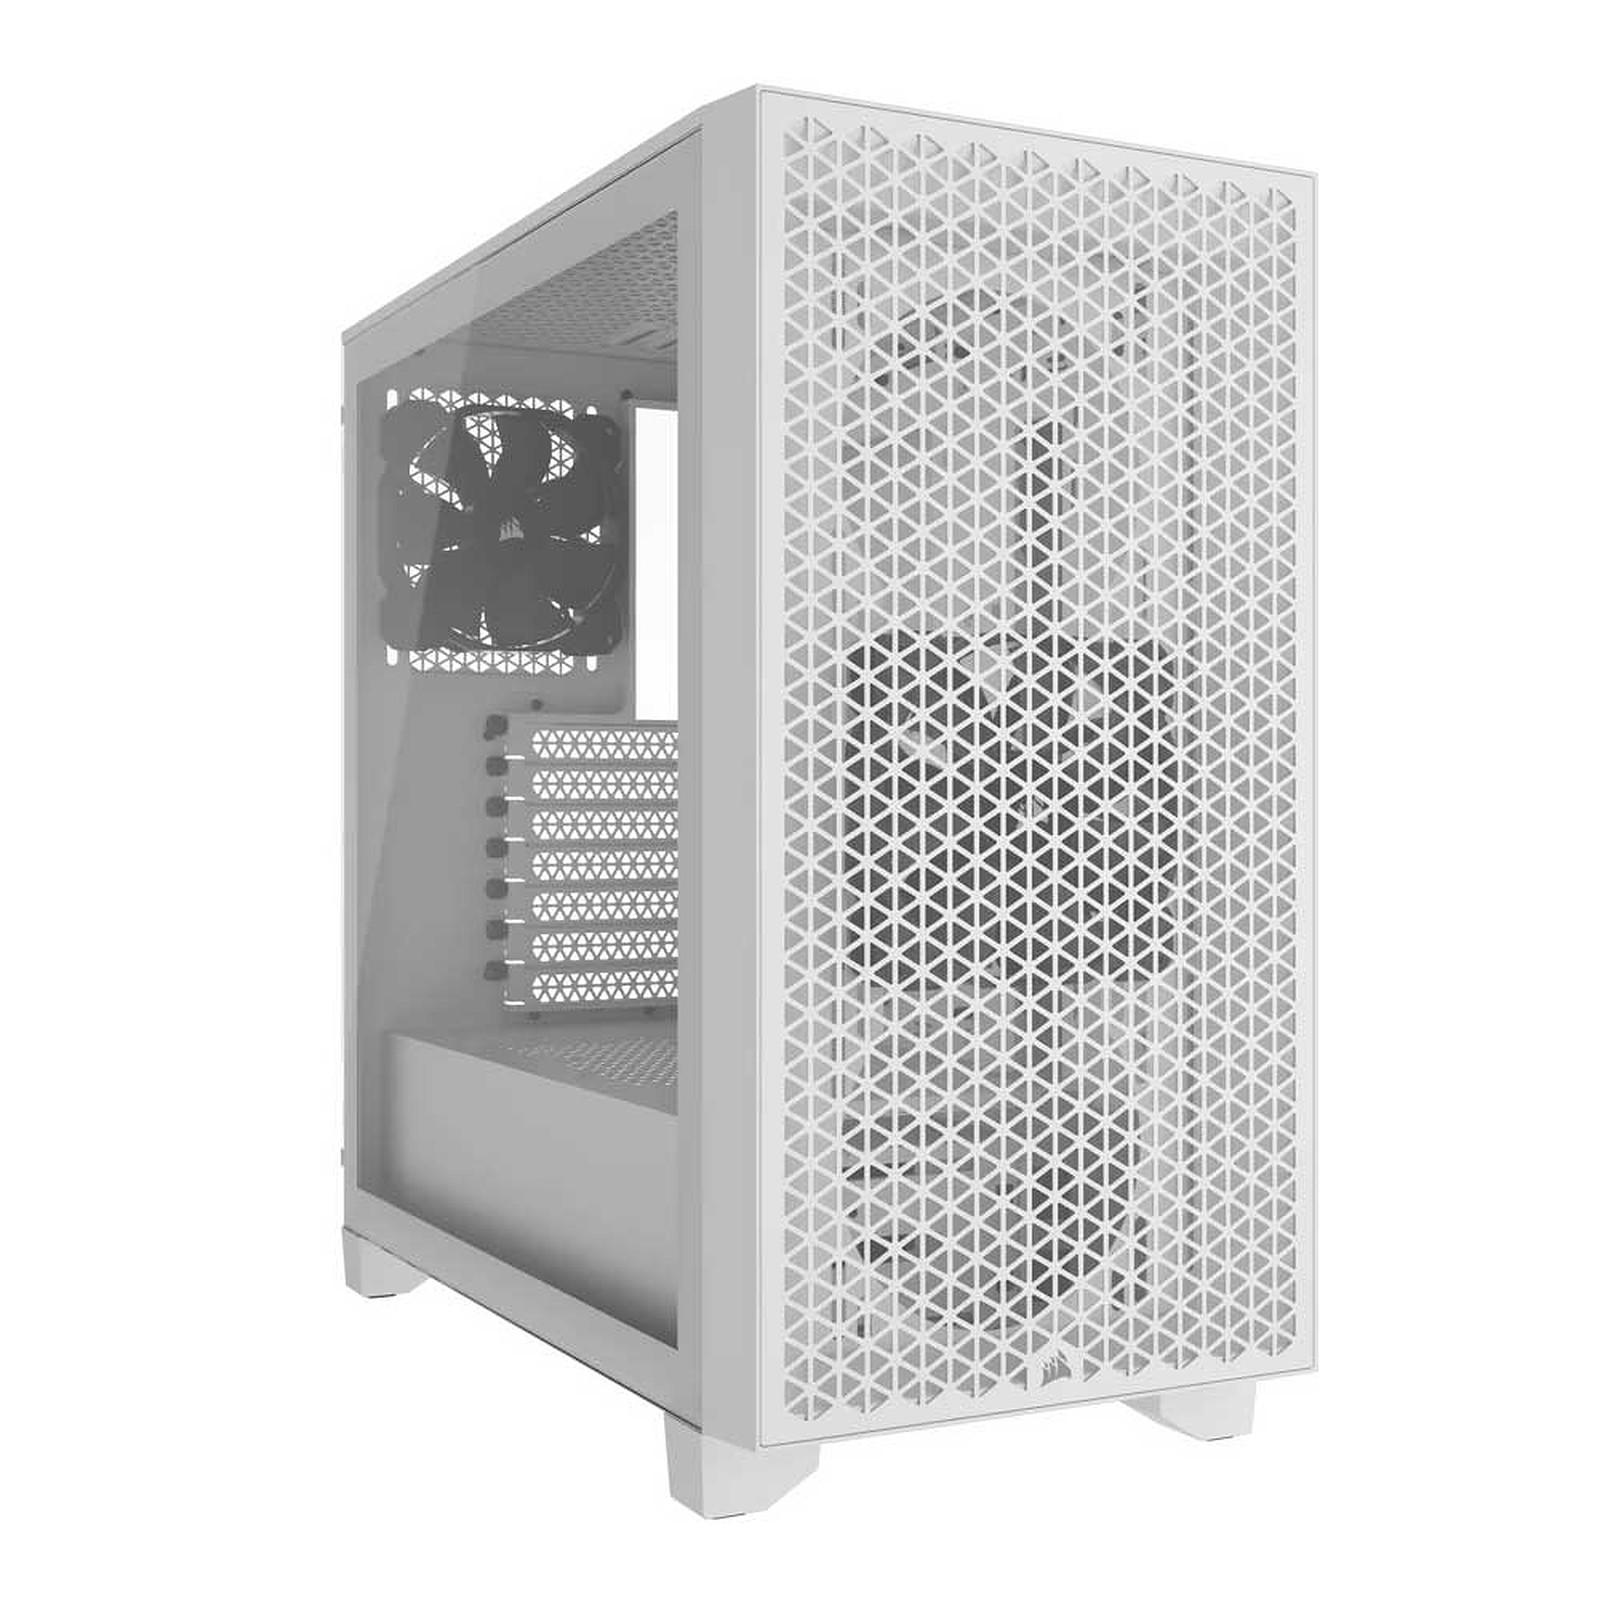 3000D AIRFLOW MID-TOWER PC CASE WHITE